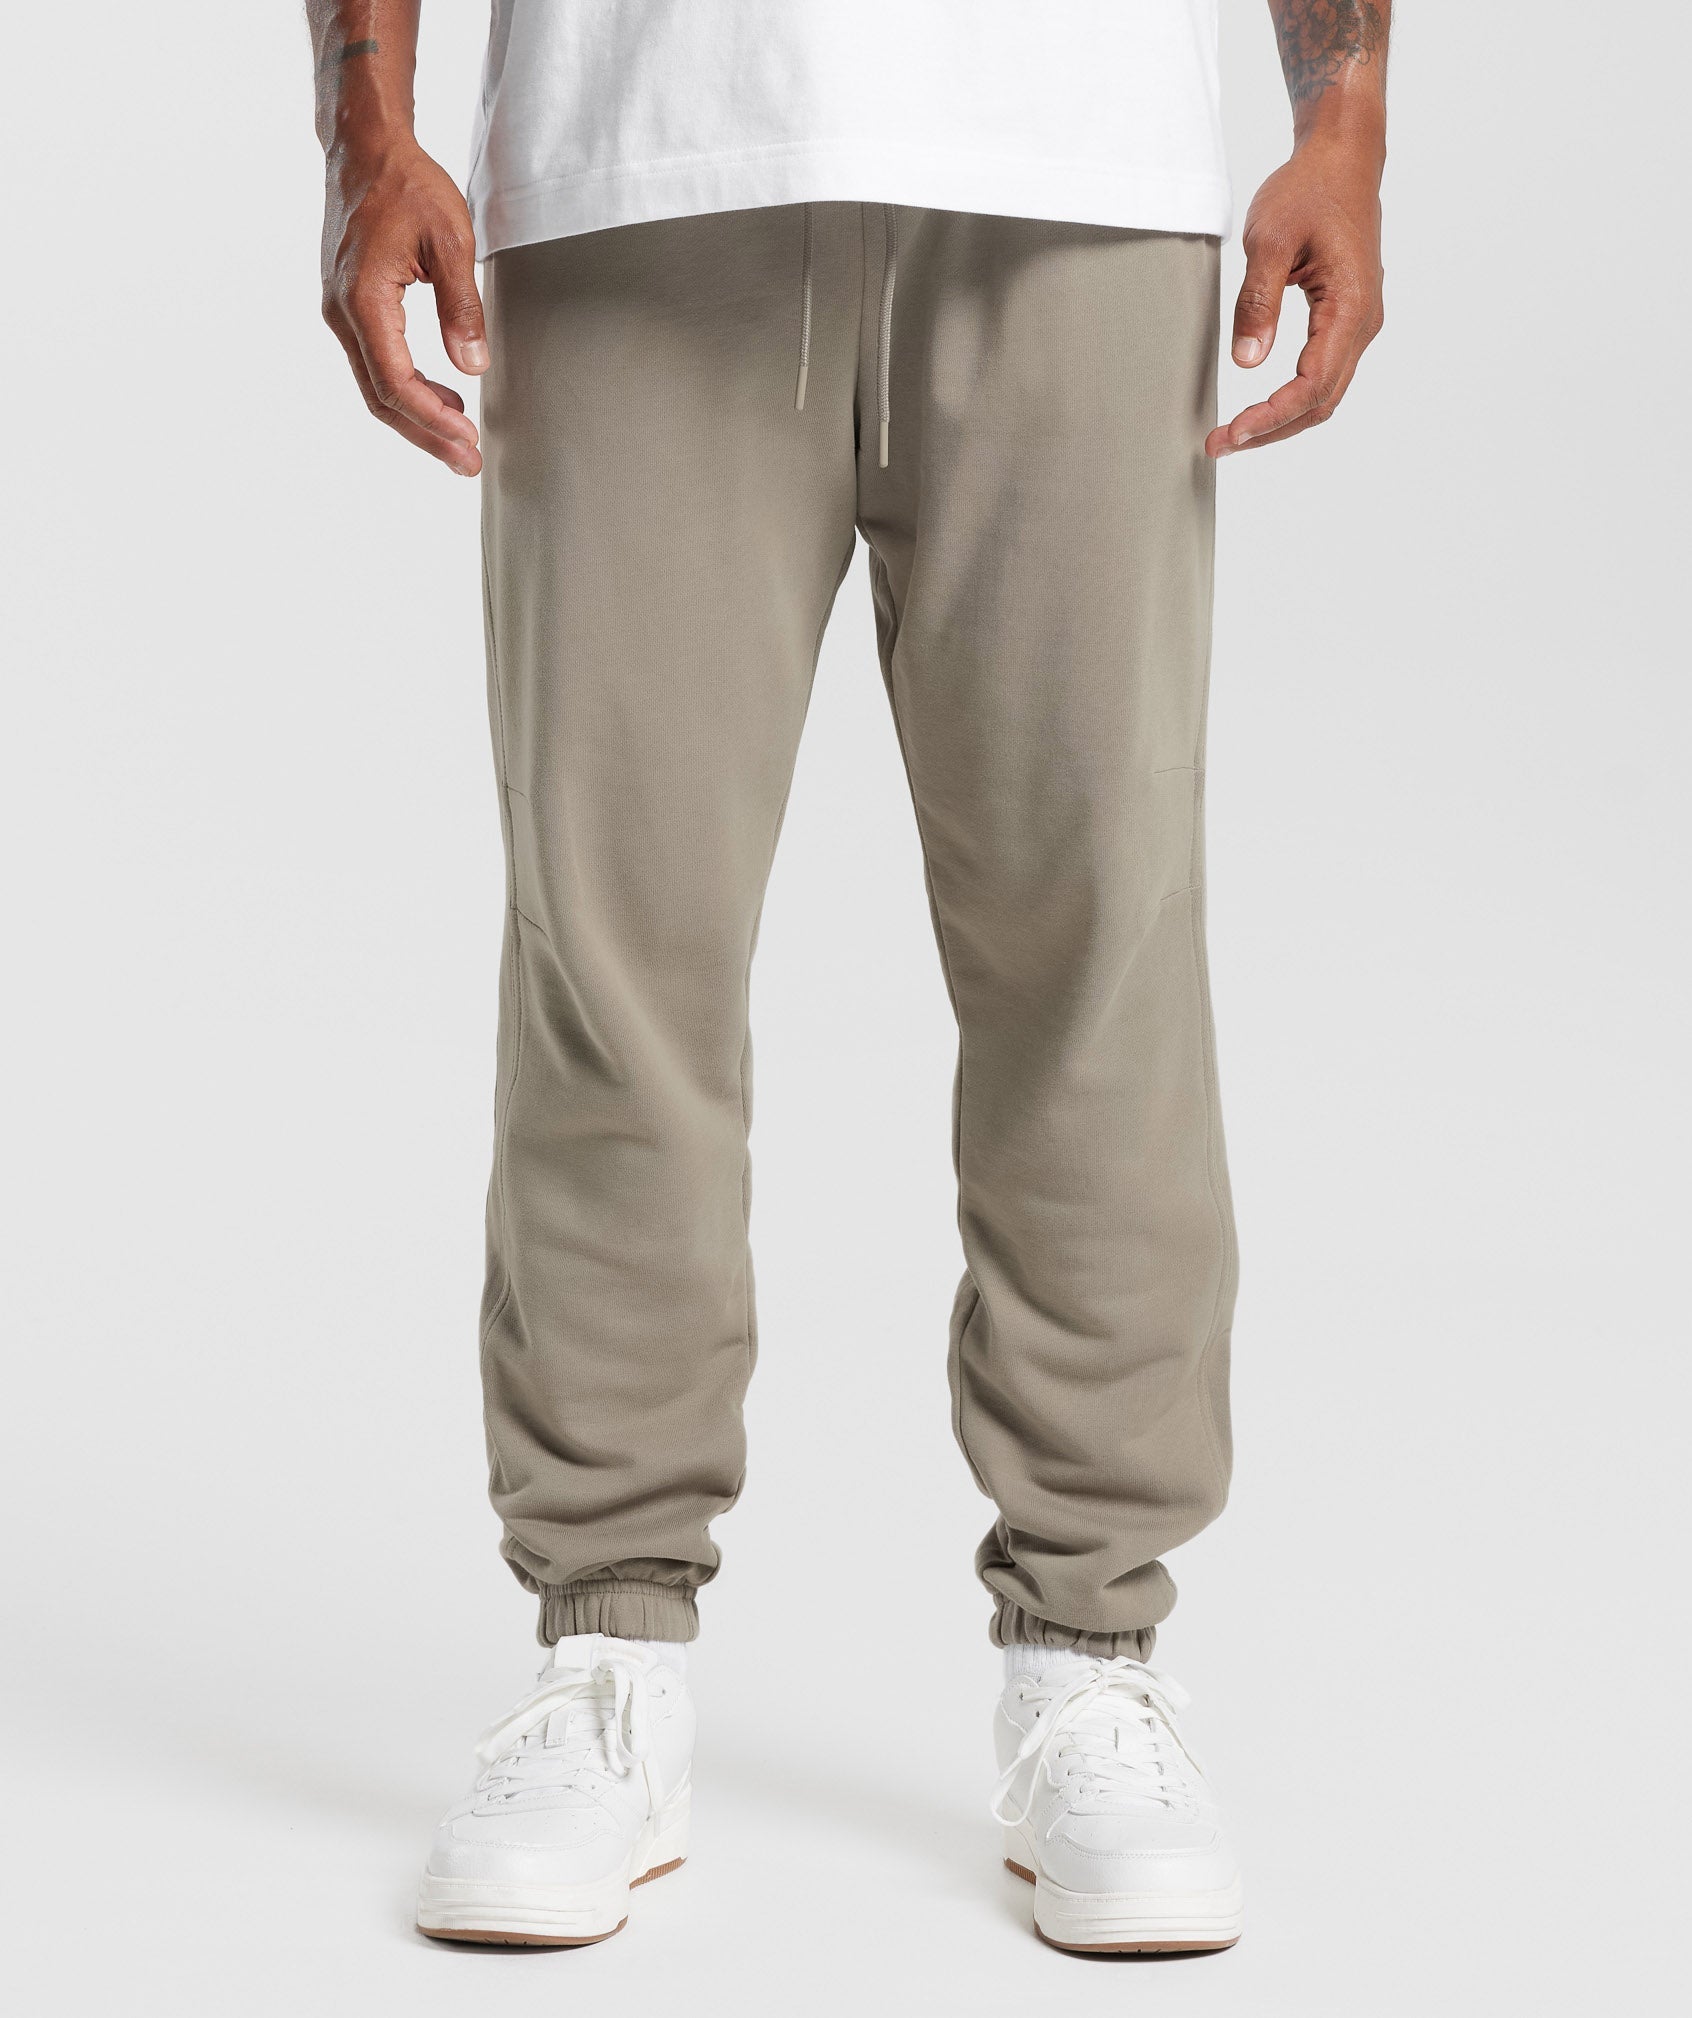 Rest Day Essentials Joggers in Linen Brown